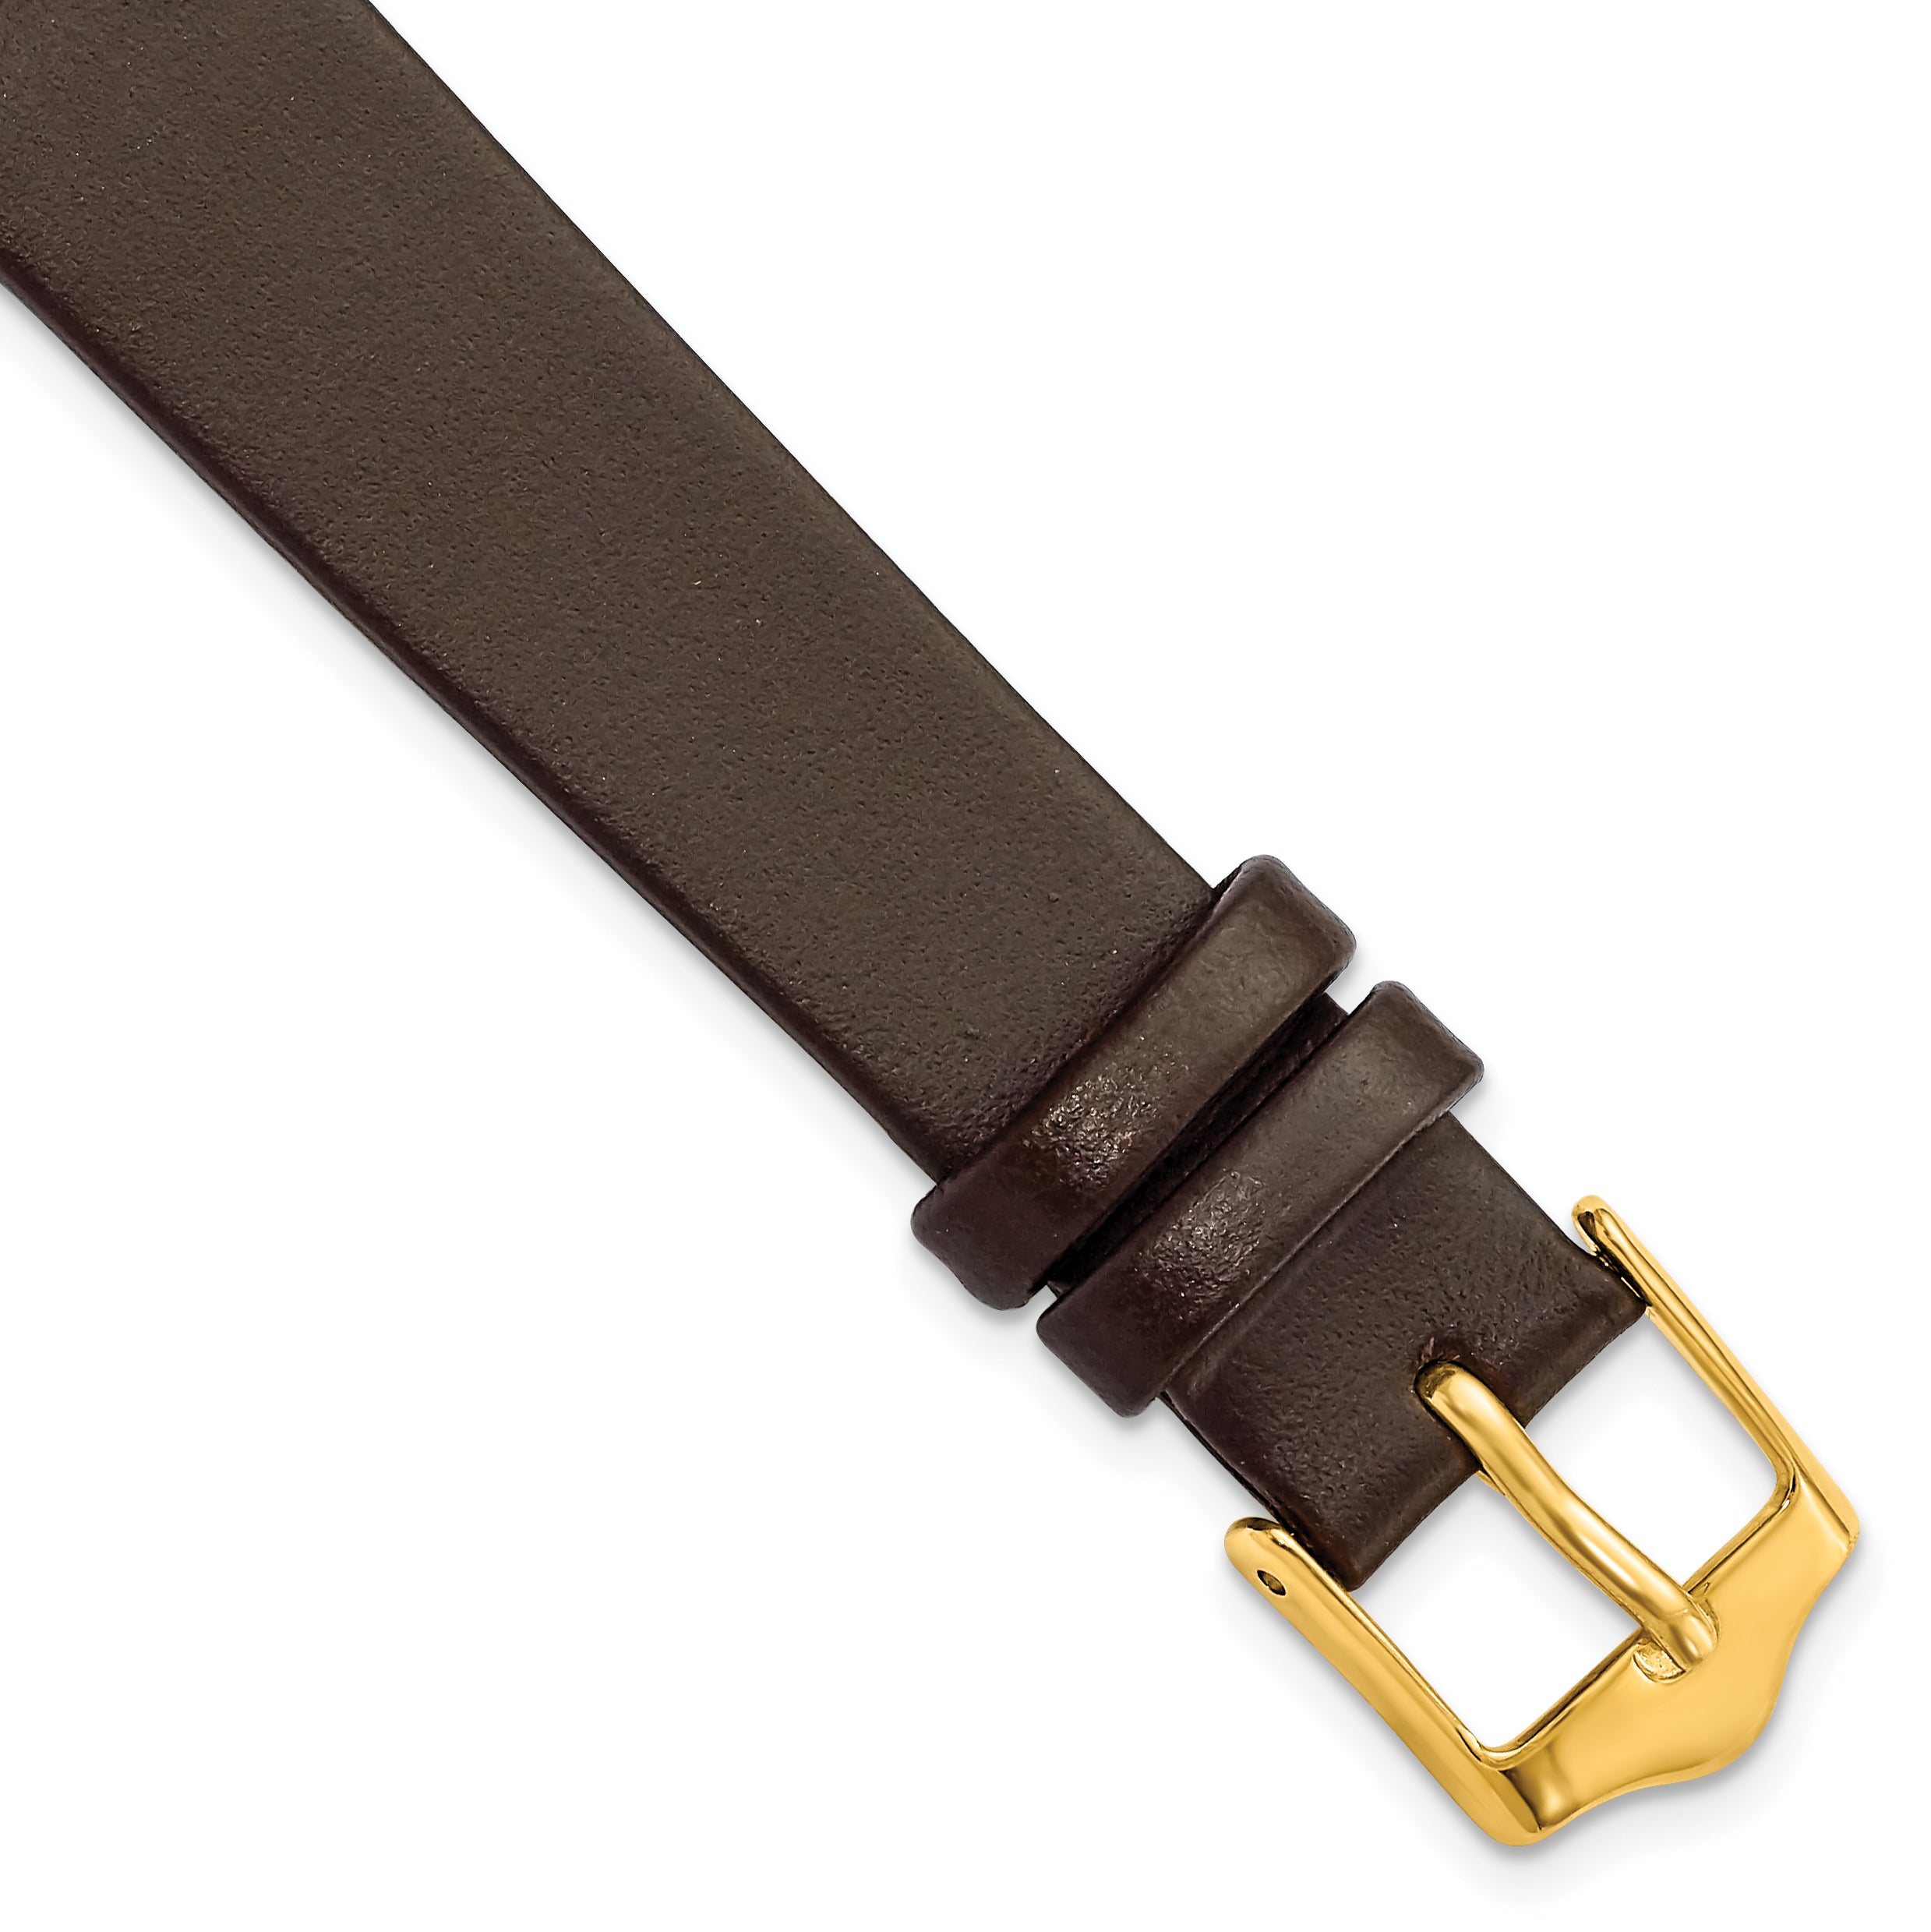 DeBeer 14mm Brown Smooth Flat Leather with Gold-tone Buckle 6.75 inch Watch Band